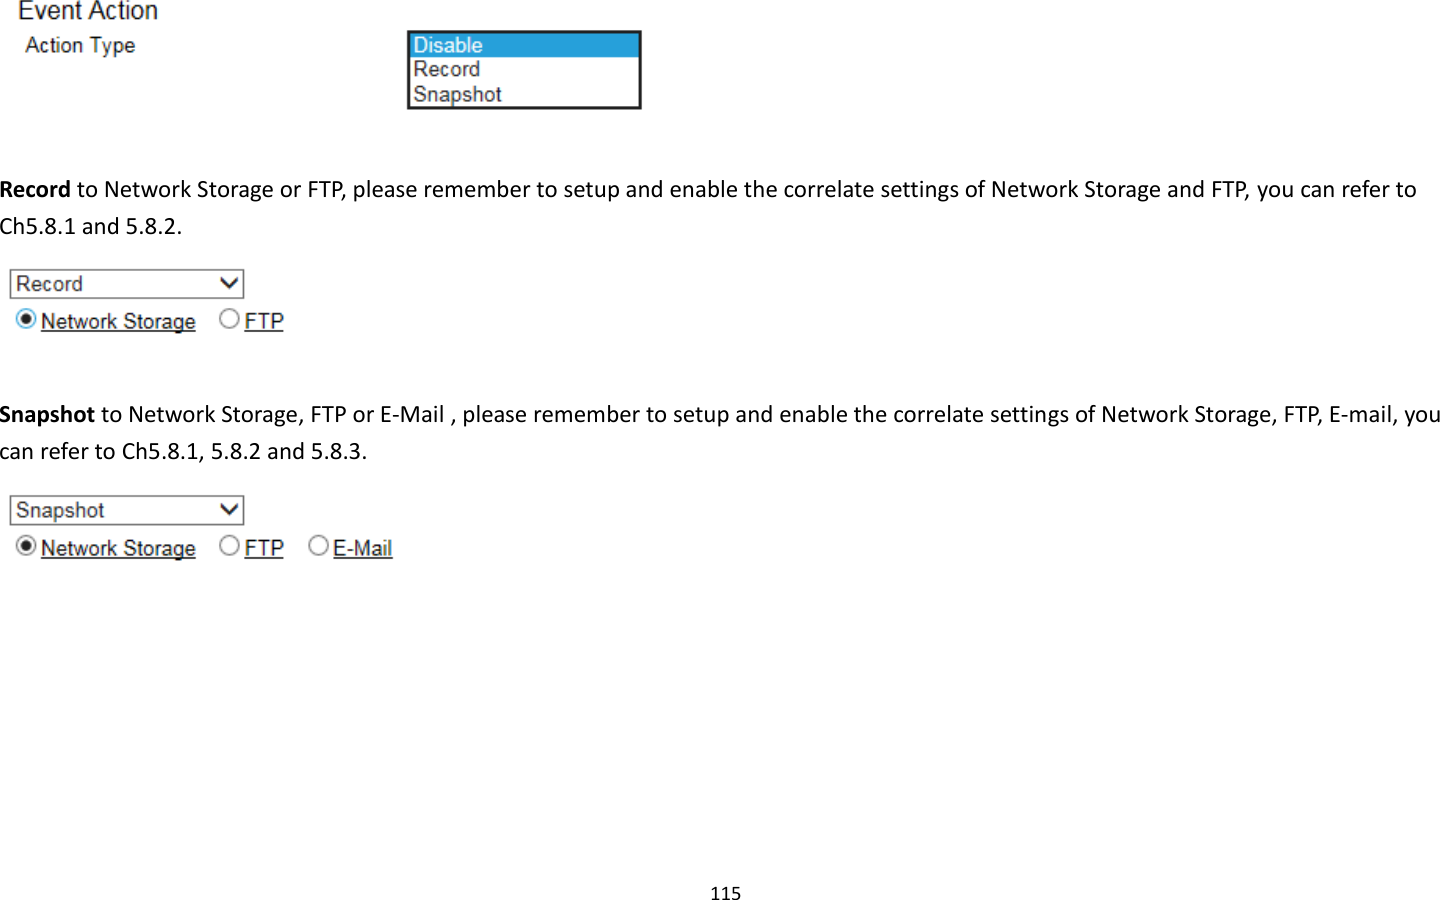 115    Record to Network Storage or FTP, please remember to setup and enable the correlate settings of Network Storage and FTP, you can refer to Ch5.8.1 and 5.8.2.   Snapshot to Network Storage, FTP or E-Mail , please remember to setup and enable the correlate settings of Network Storage, FTP, E-mail, you can refer to Ch5.8.1, 5.8.2 and 5.8.3.    